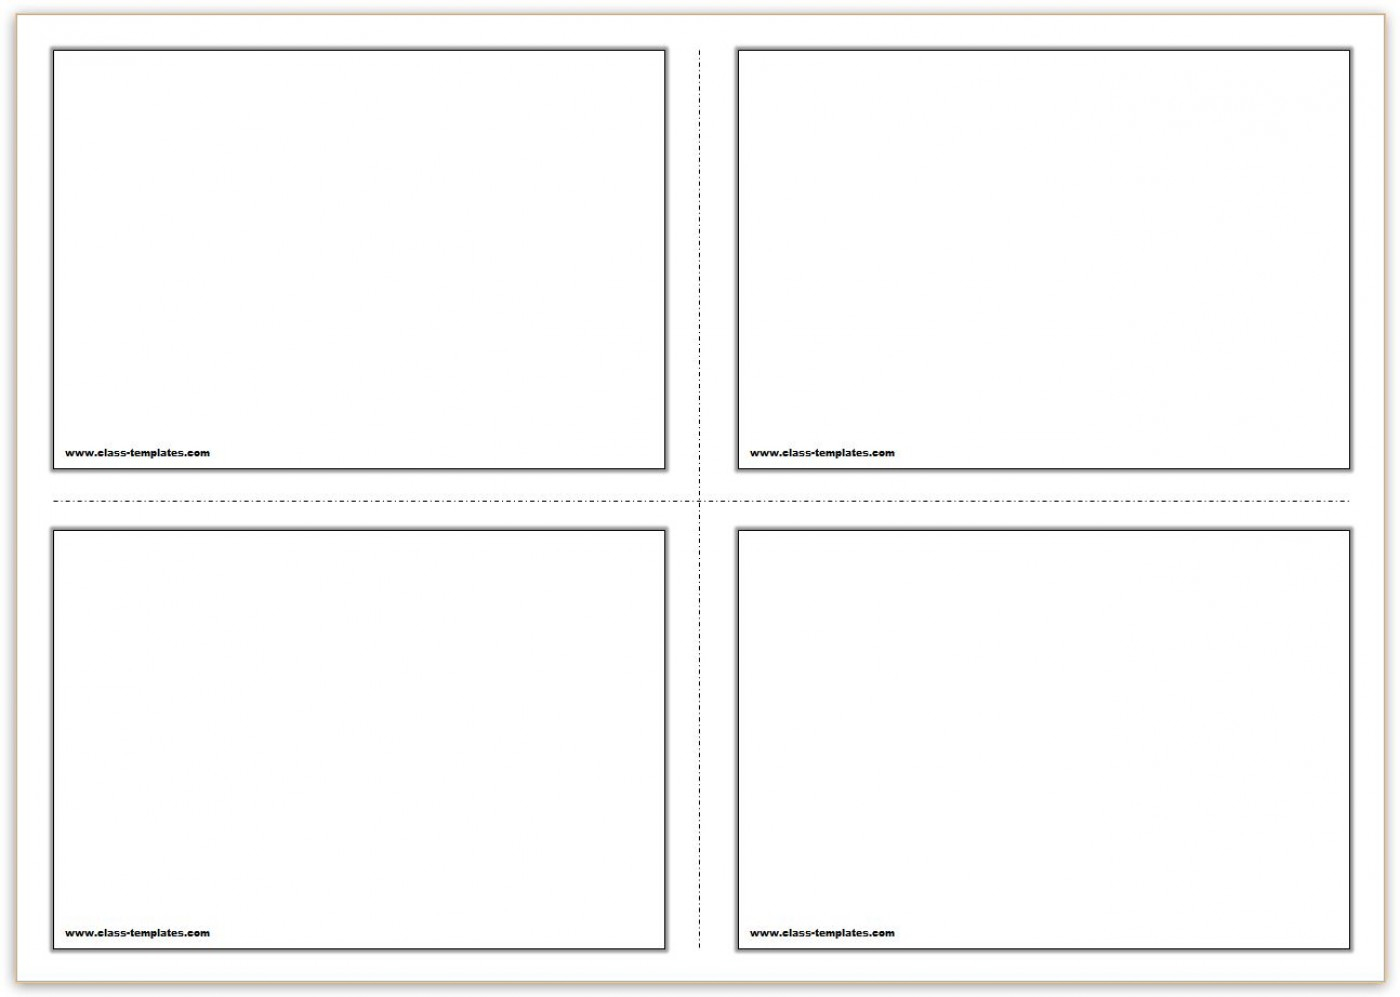 001 Printable Flash Cards Template 3X3 Free Card ~ Ulyssesroom - Free Printable Flash Card Maker